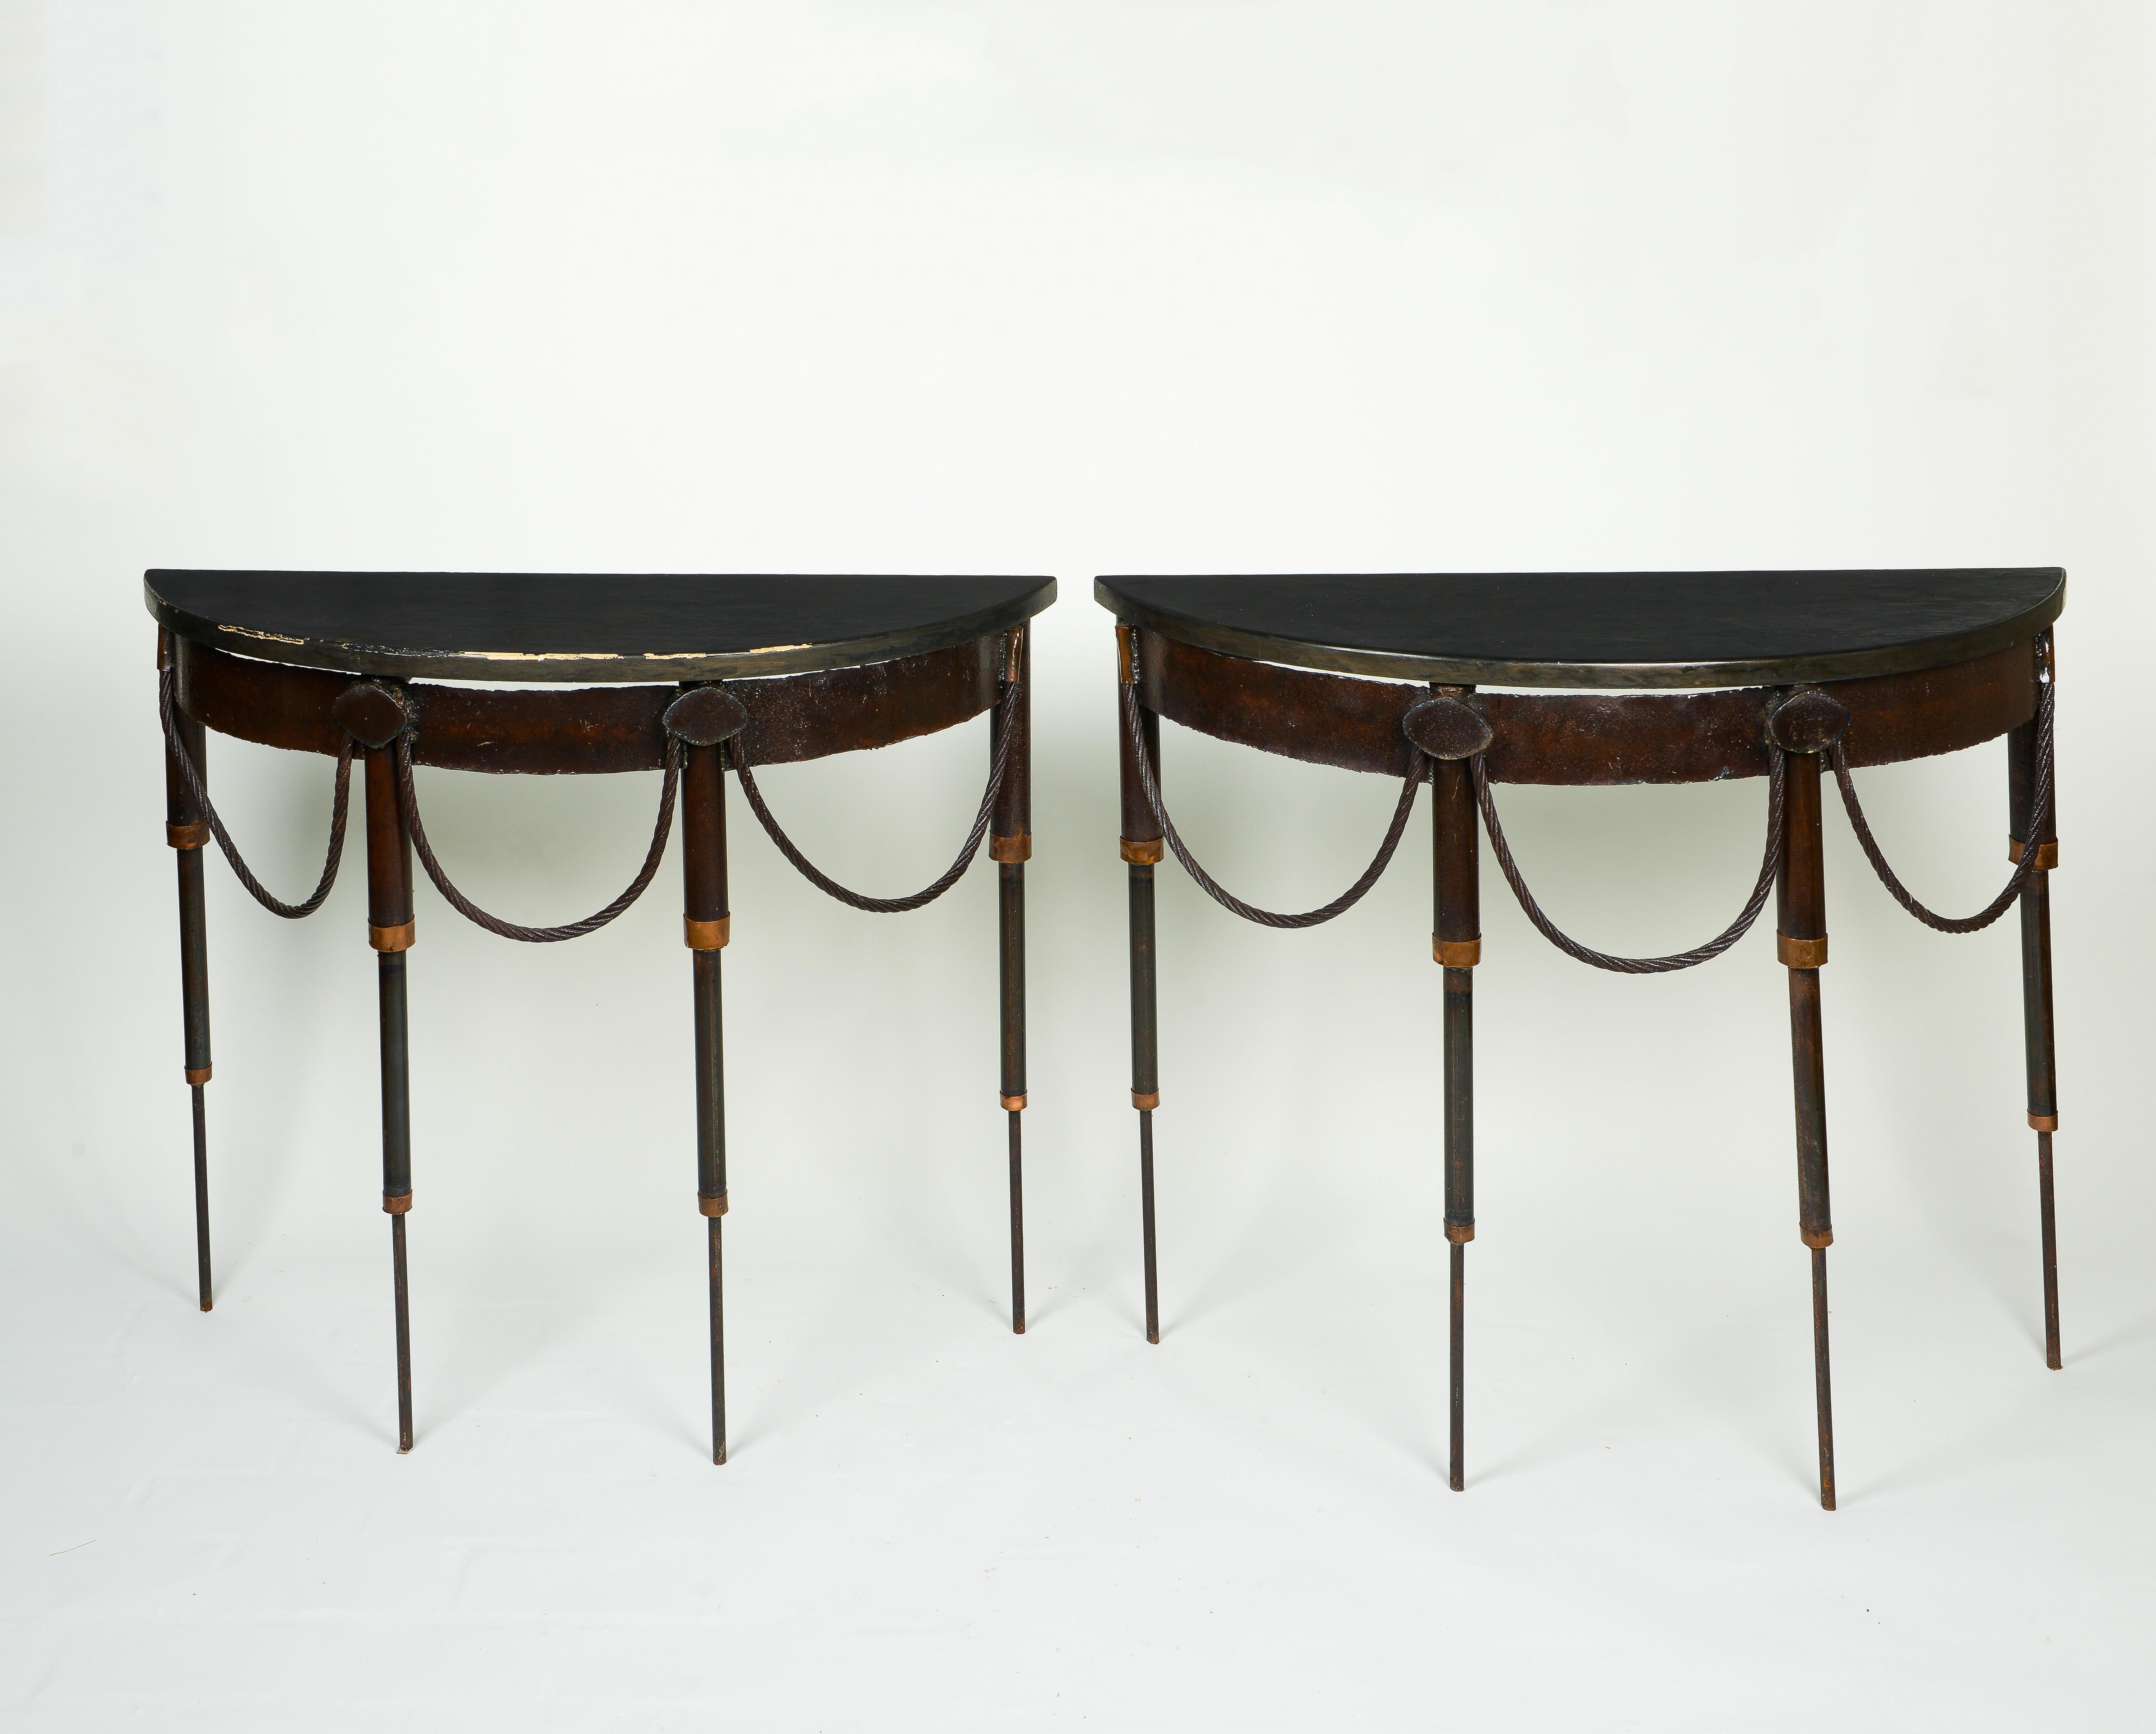 Each with demi-lune-shaped wooden top faux painted to look like black stone; raised on iron rod legs headed by studs festooned with metal rope swags. Unusual and chic.